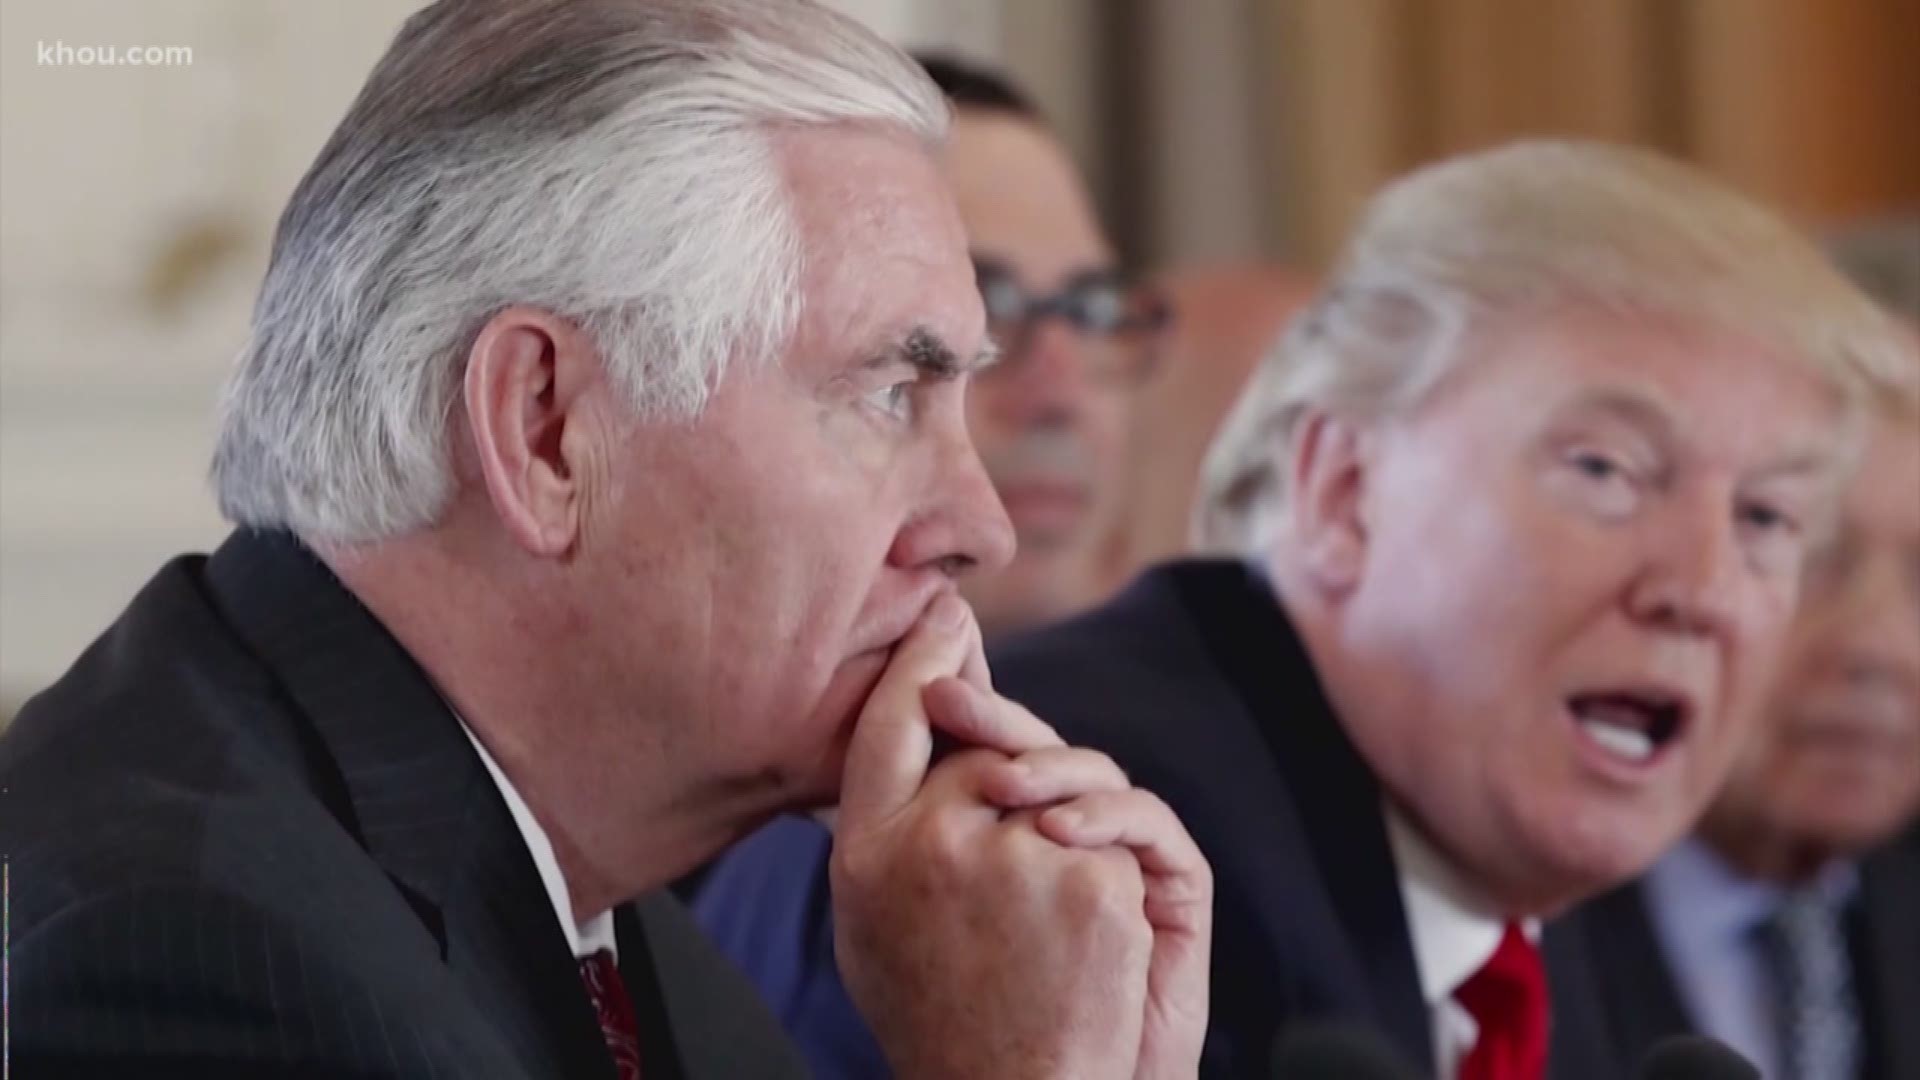 President Trump responded to Tillerson via Twitter on Friday afternoon, calling his former Secretary of State "dumb as a rock" and "lazy as hell."